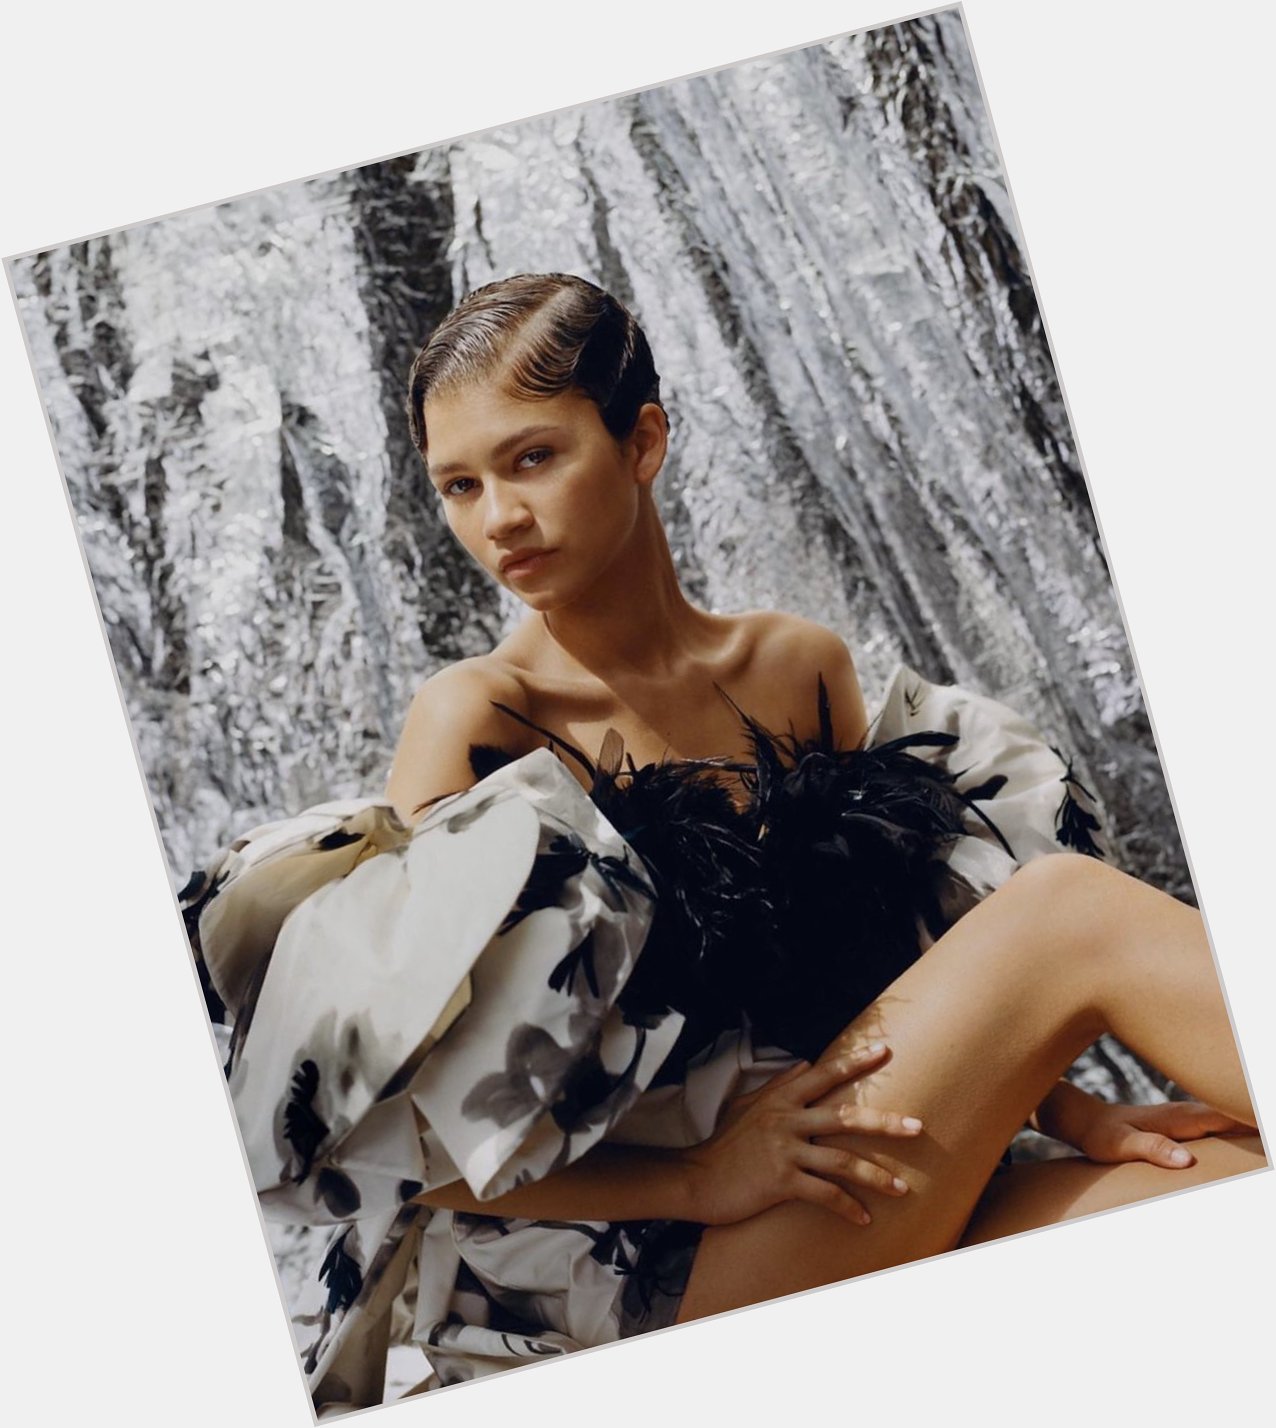 Happy birthday day to the one and only, zendaya coleman! 